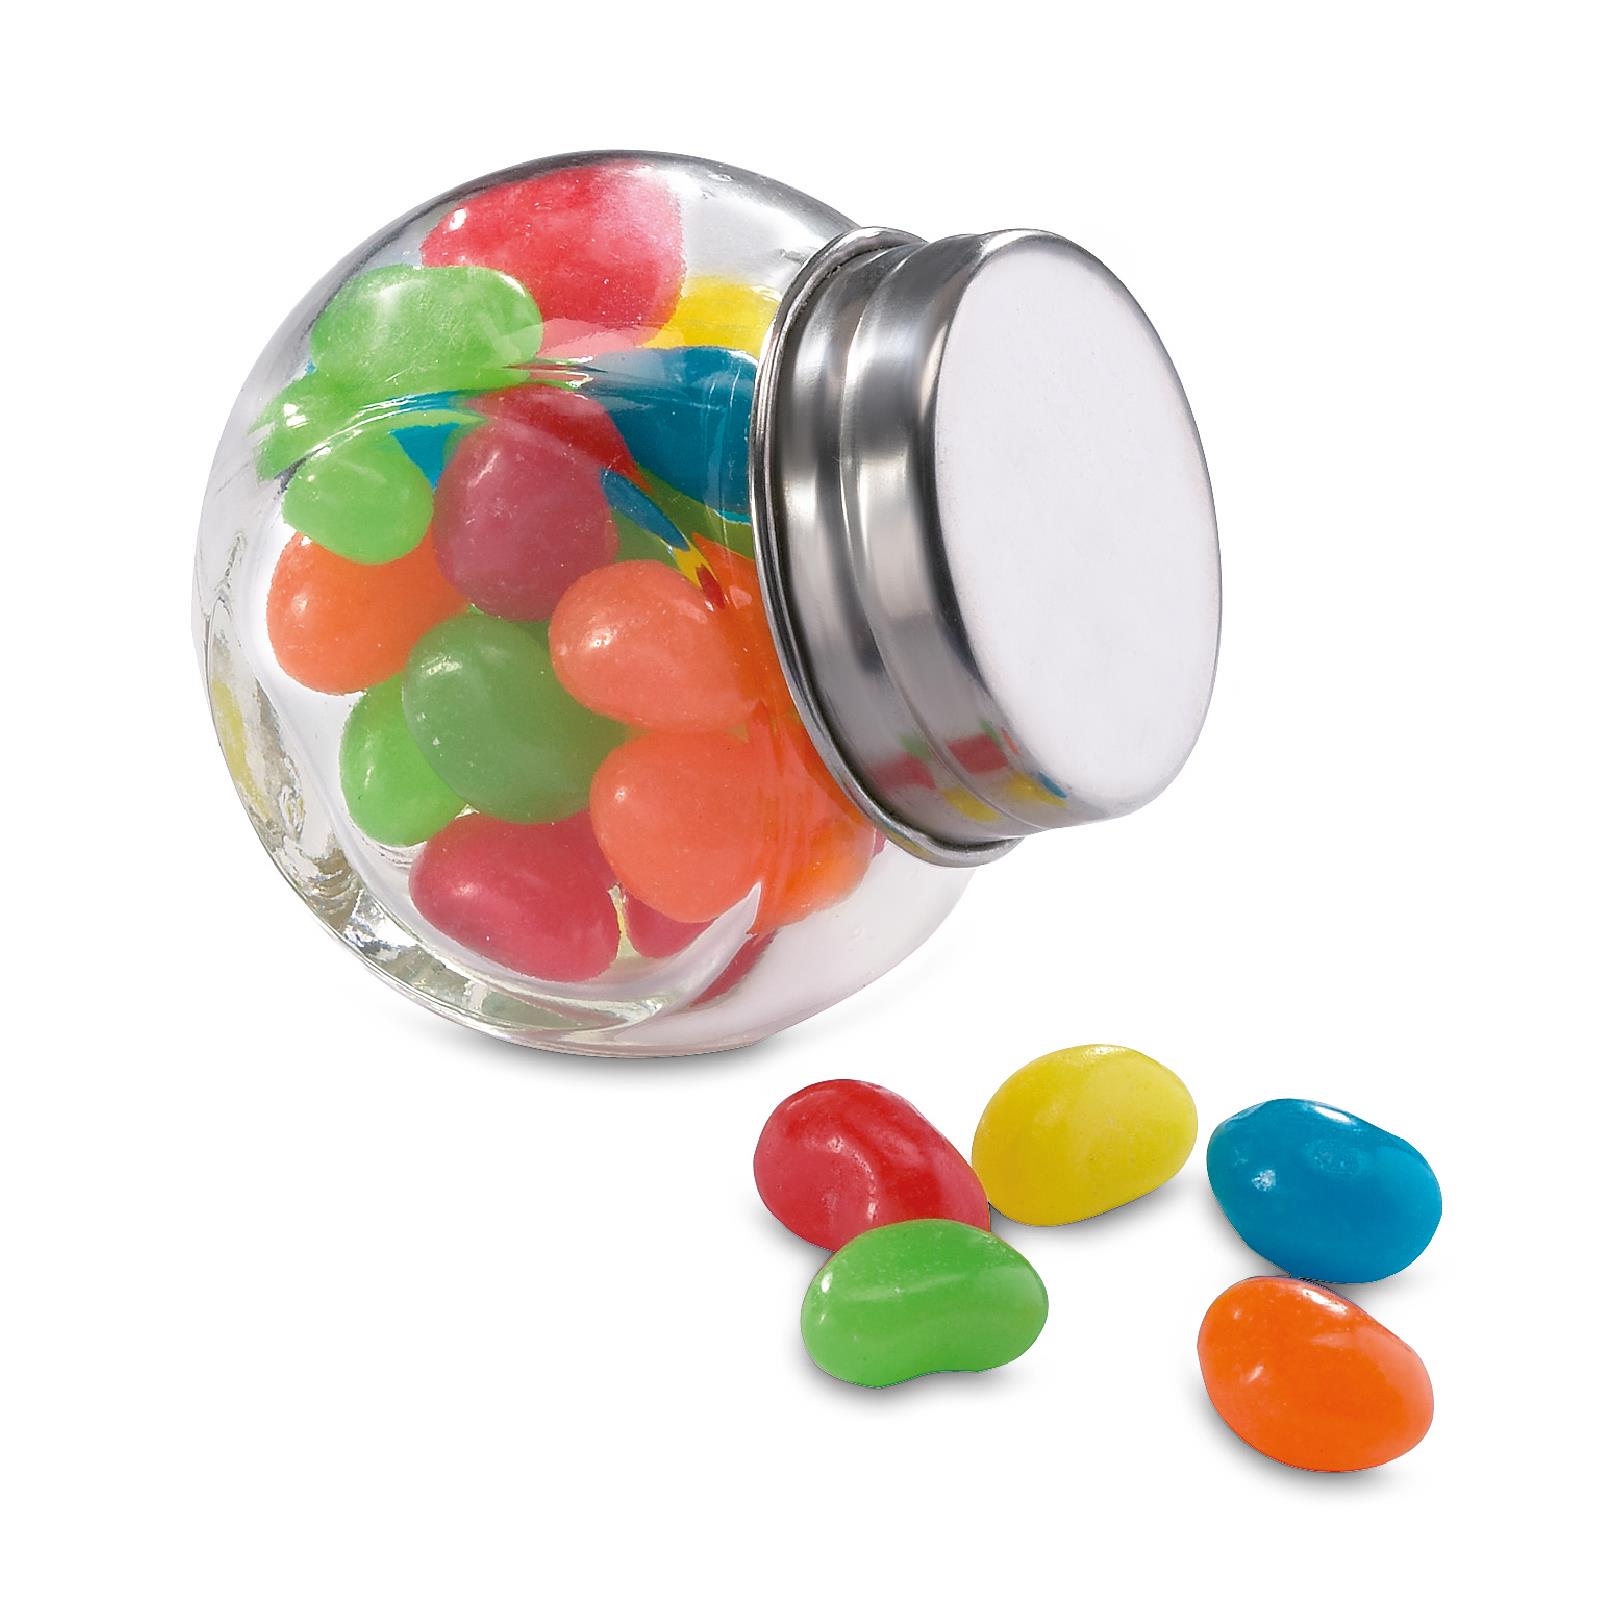 Promotional Glass jar with jelly beans